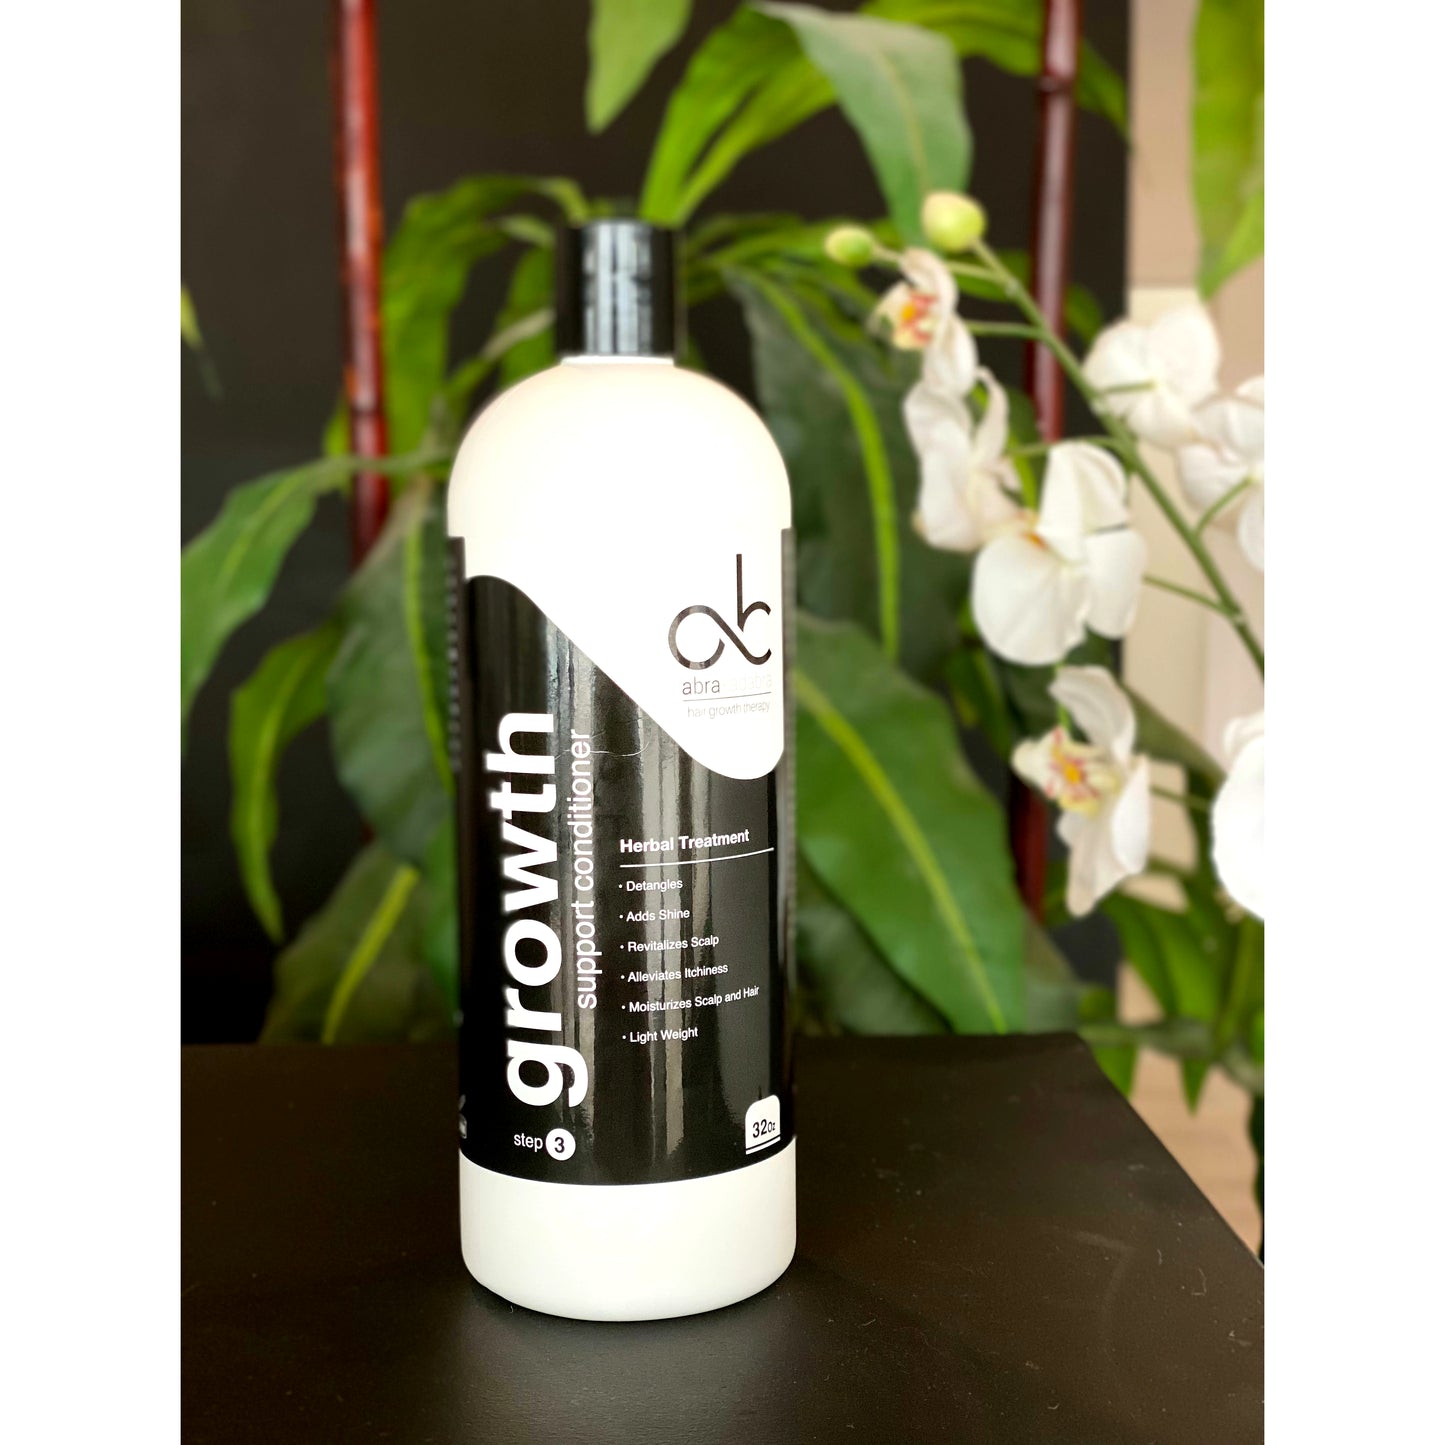 Growth Support Conditioner 32oz (Herbal Treatment)